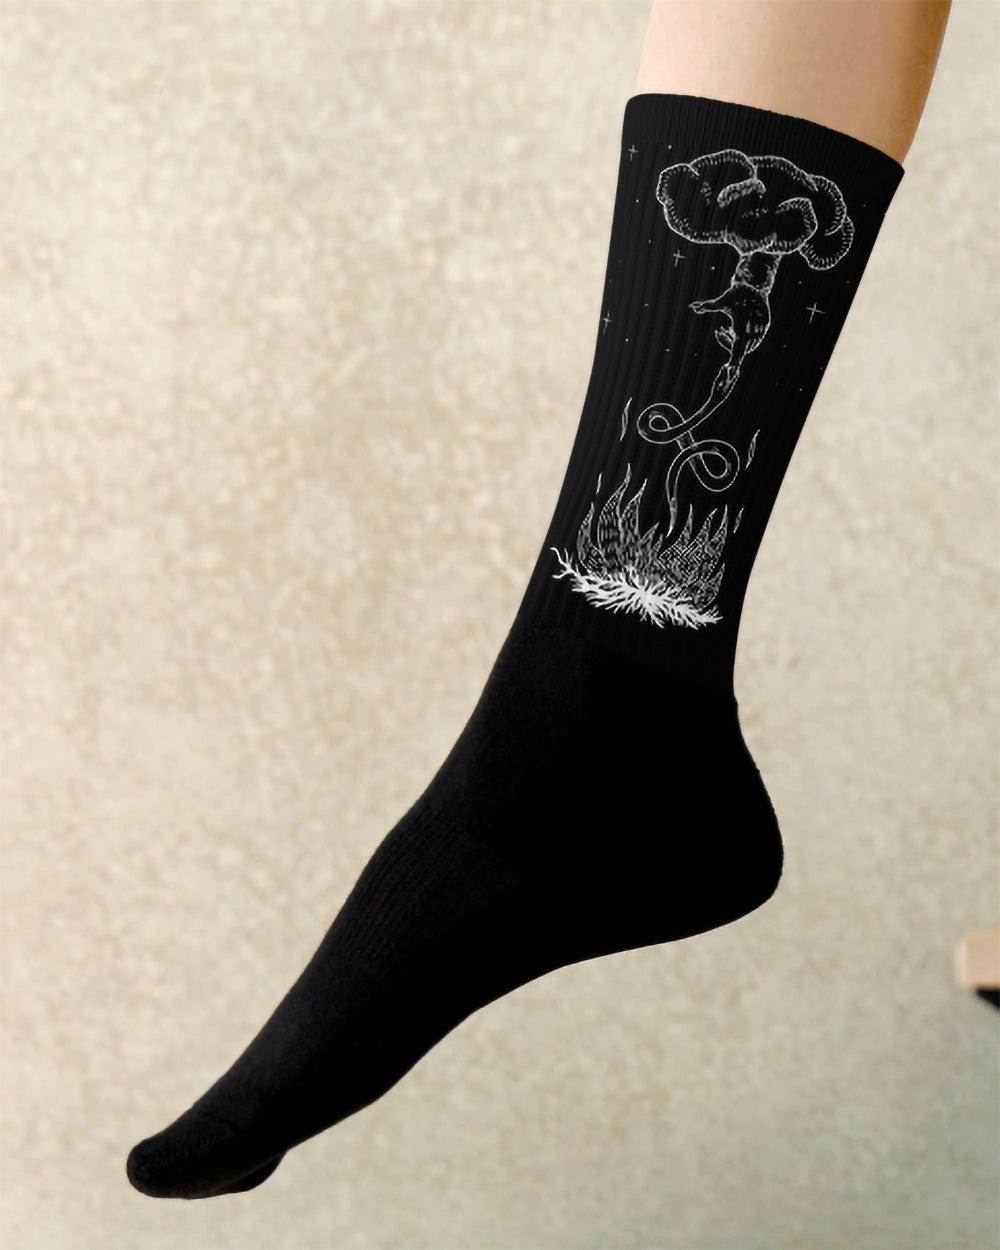 Godbane Socks: Ethical Witchy Fashion, Goth Accessories for Dark Academia Style - On Demand Eco-friendly Sustainable Product